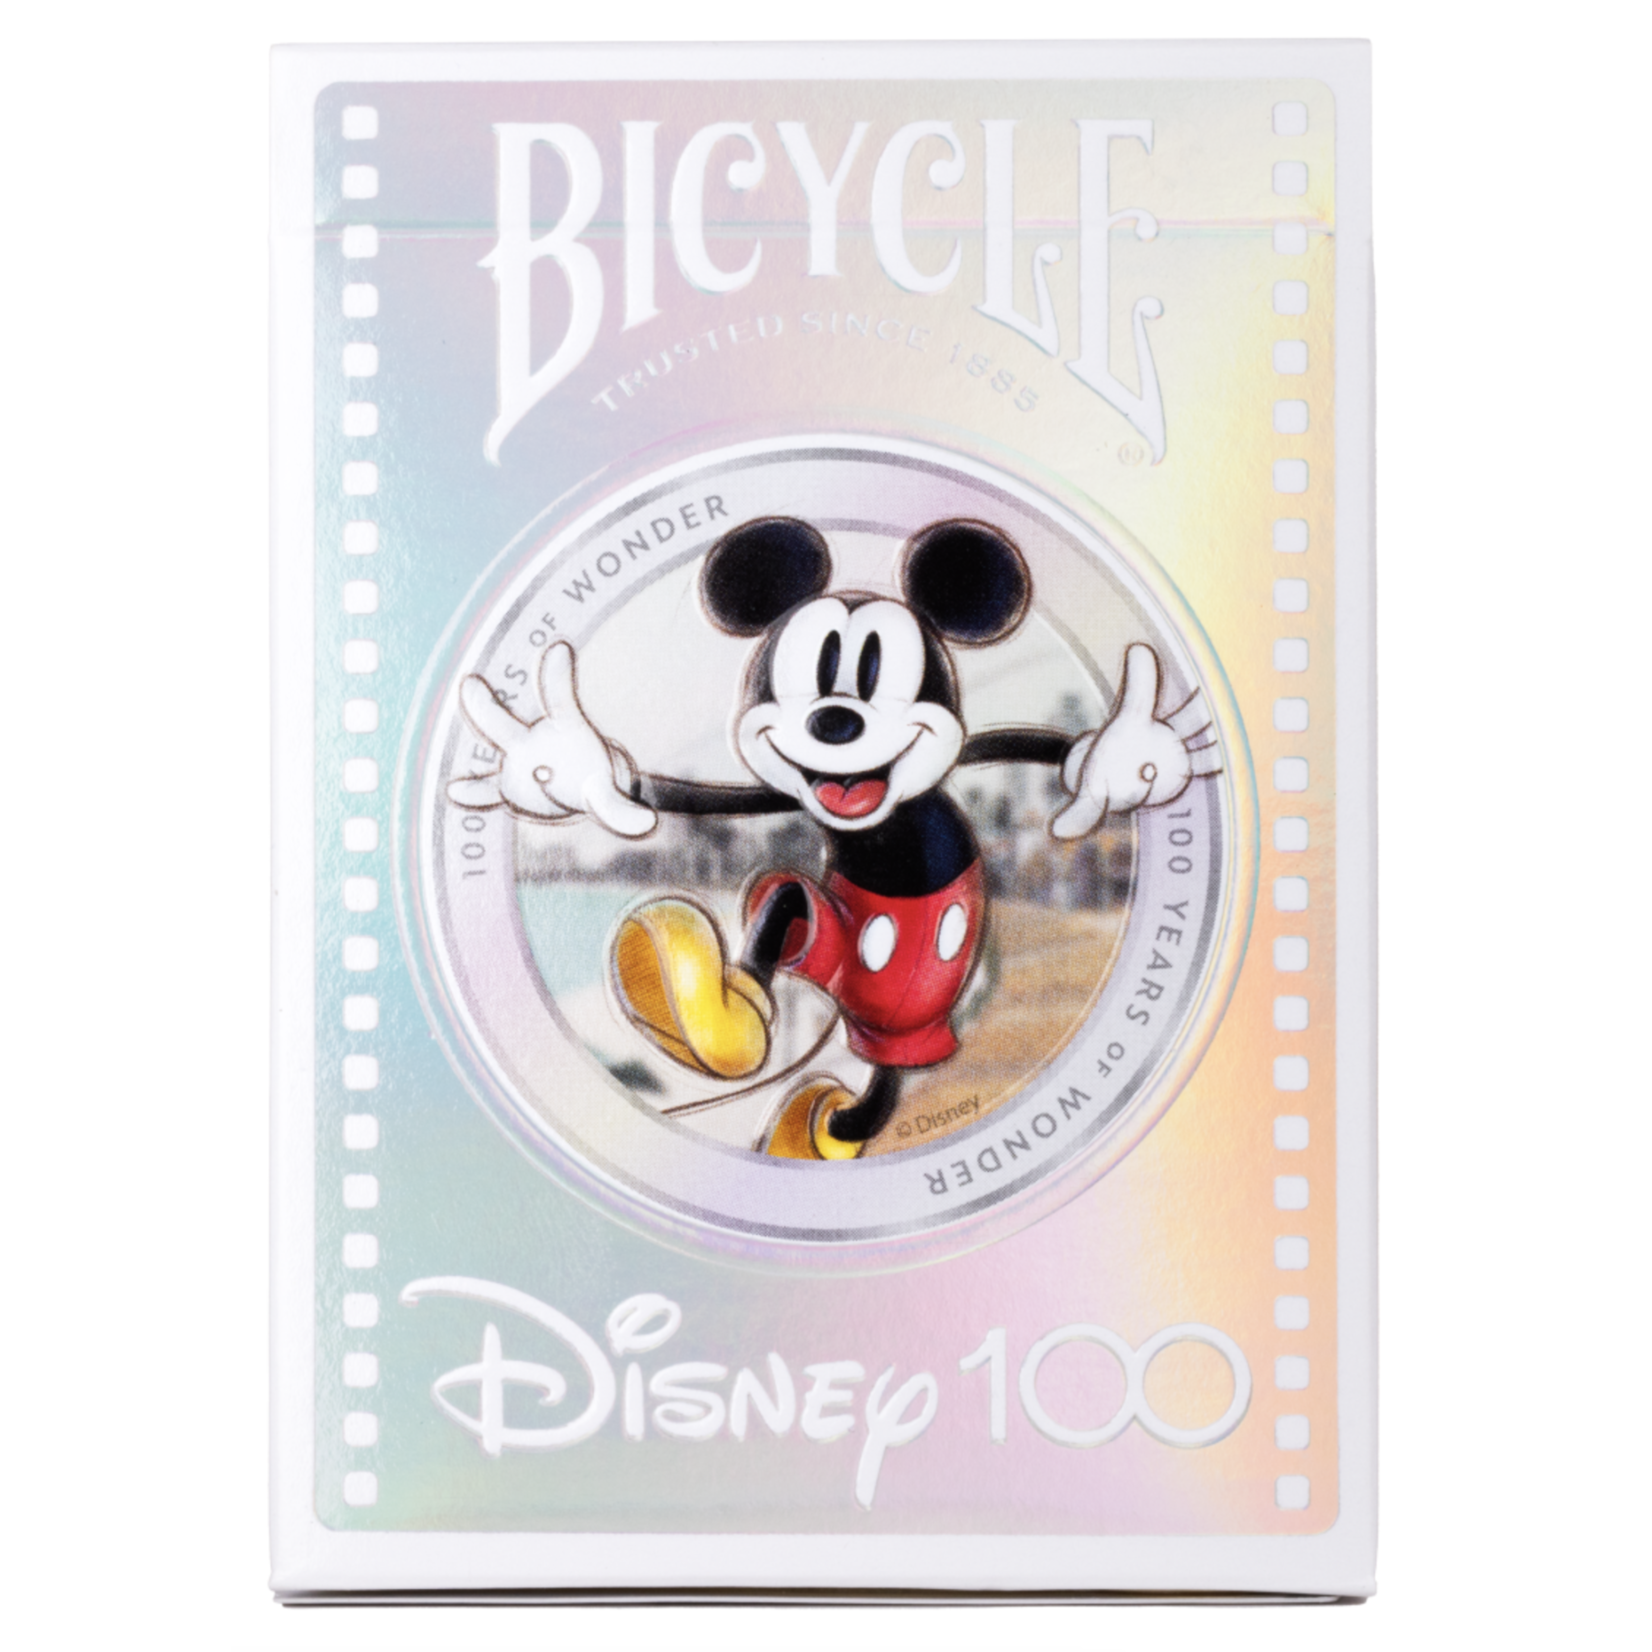 The United States Playing Card Company Bicycle Disney 100 Standard Playing Cards